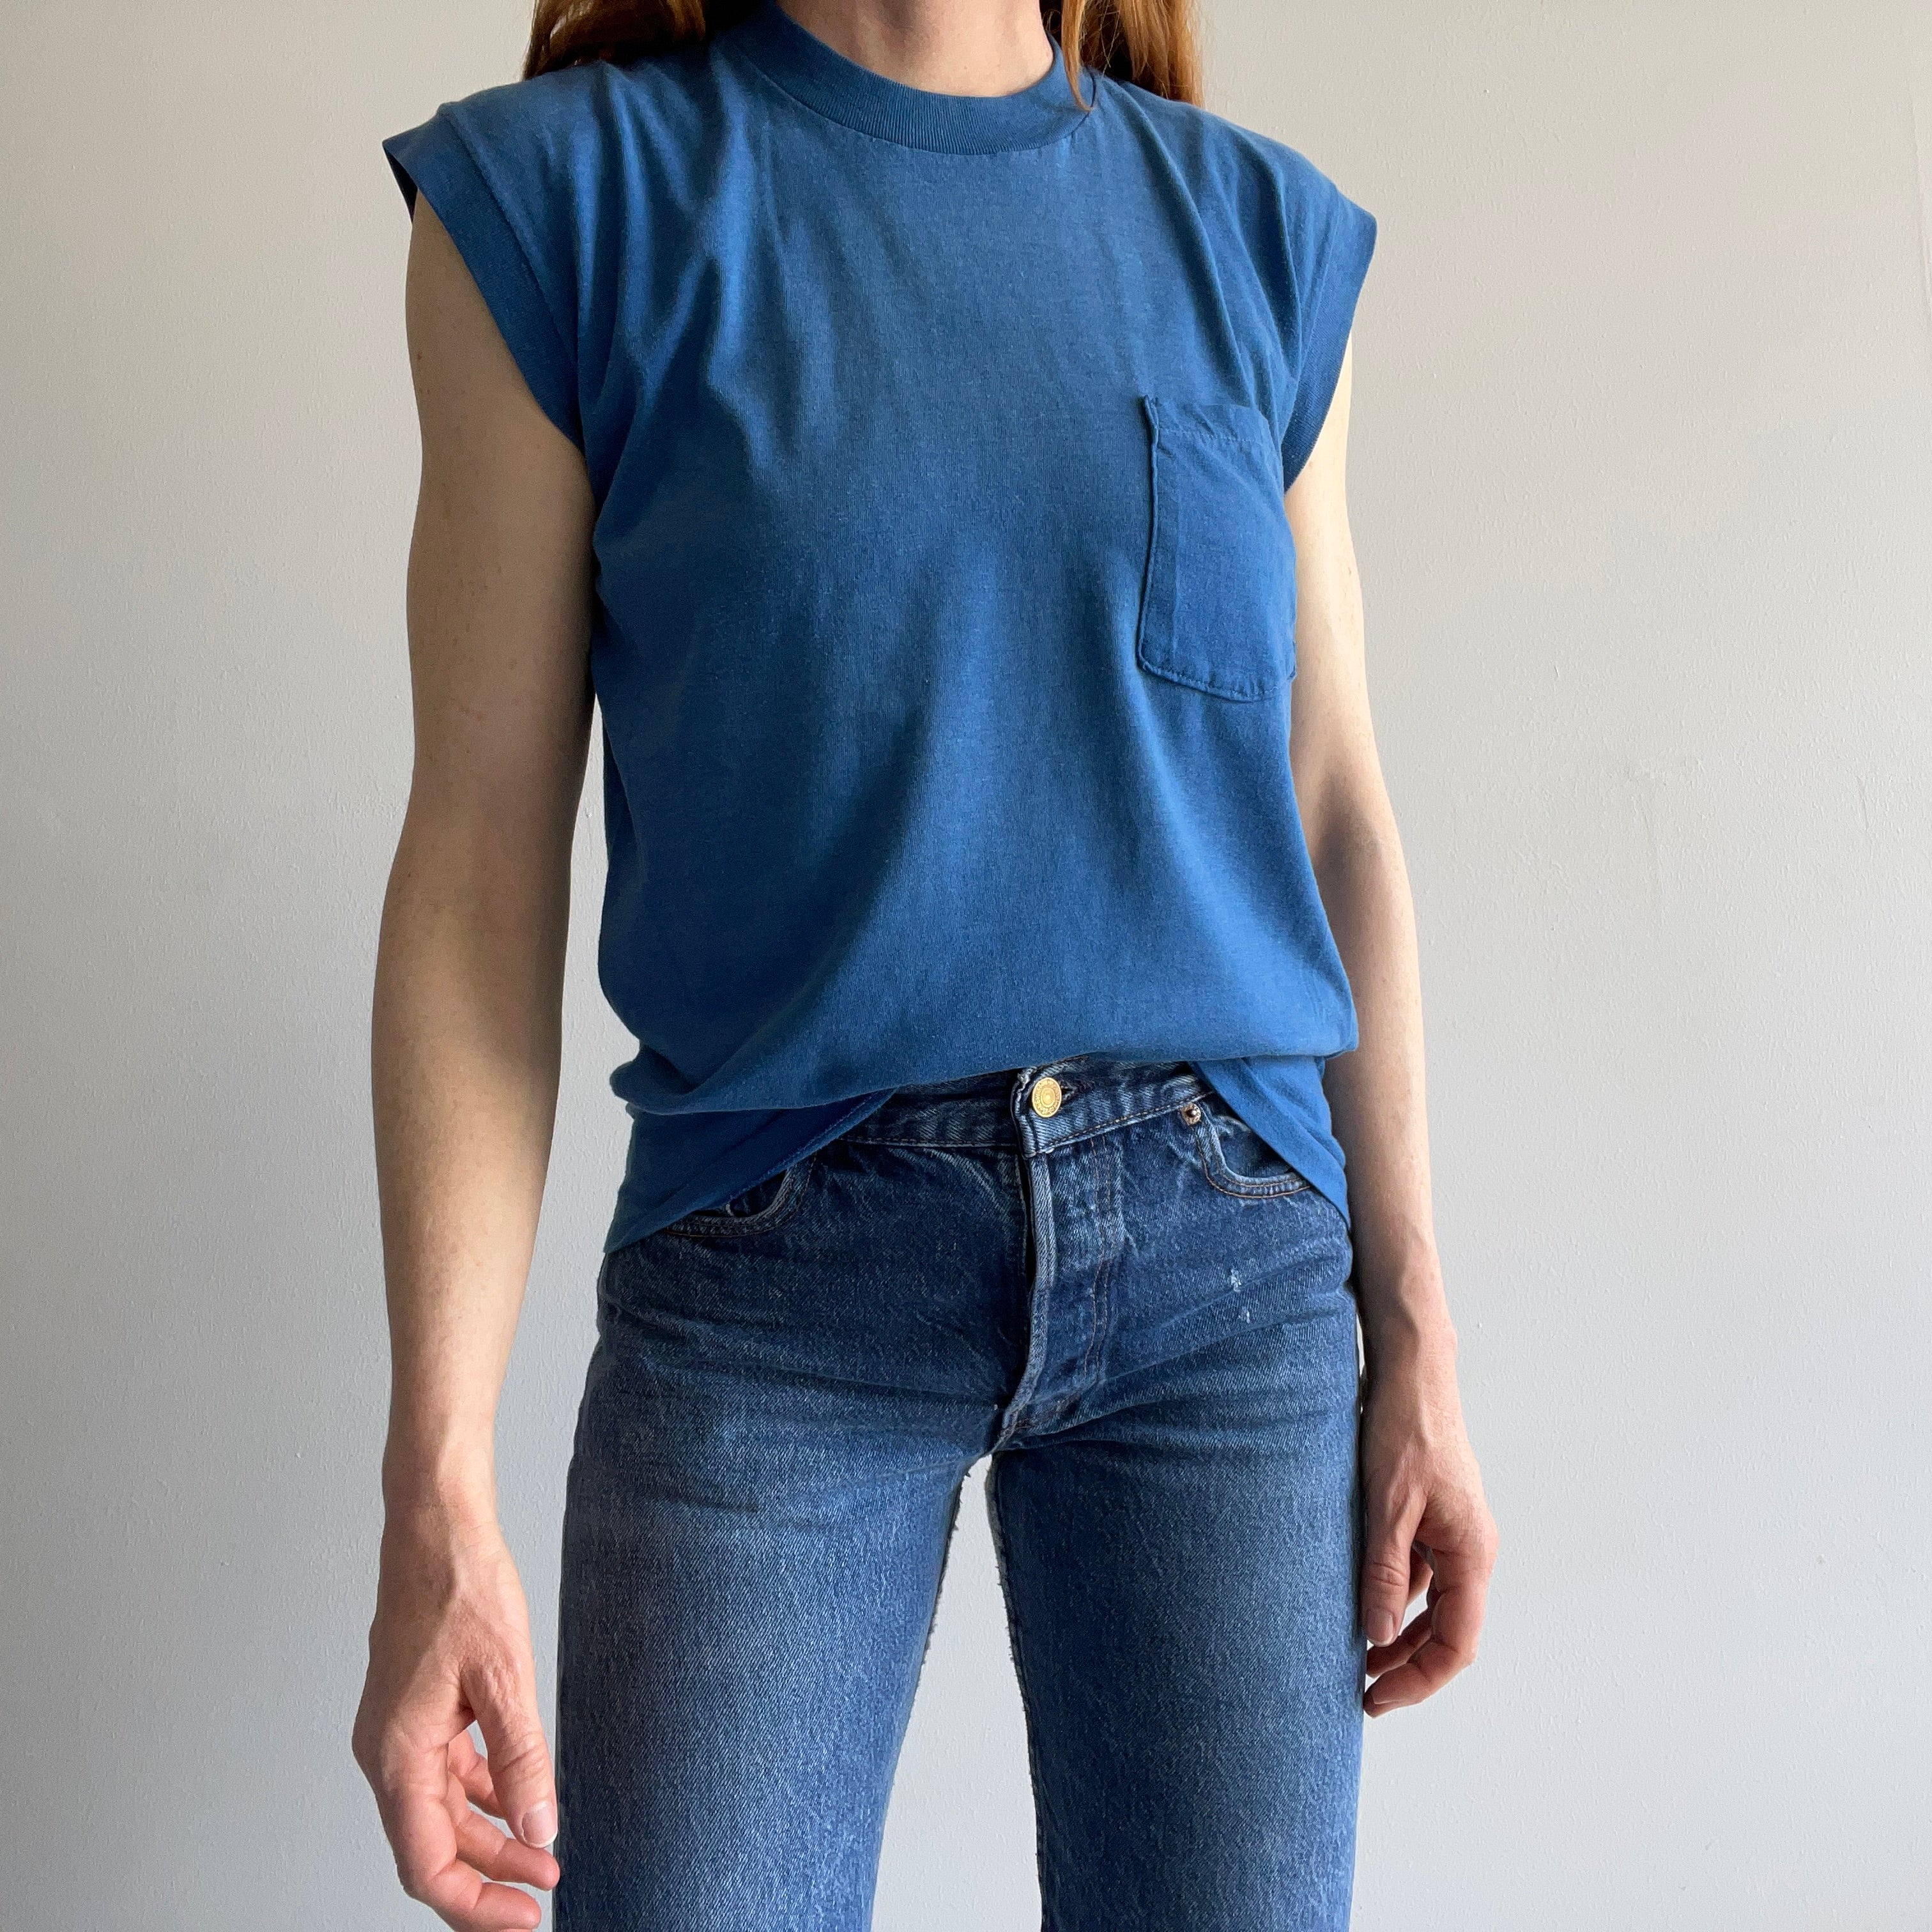 1970s Sun Faded Blank Blue Muscle Tank Pocket T-Shirt by Signal